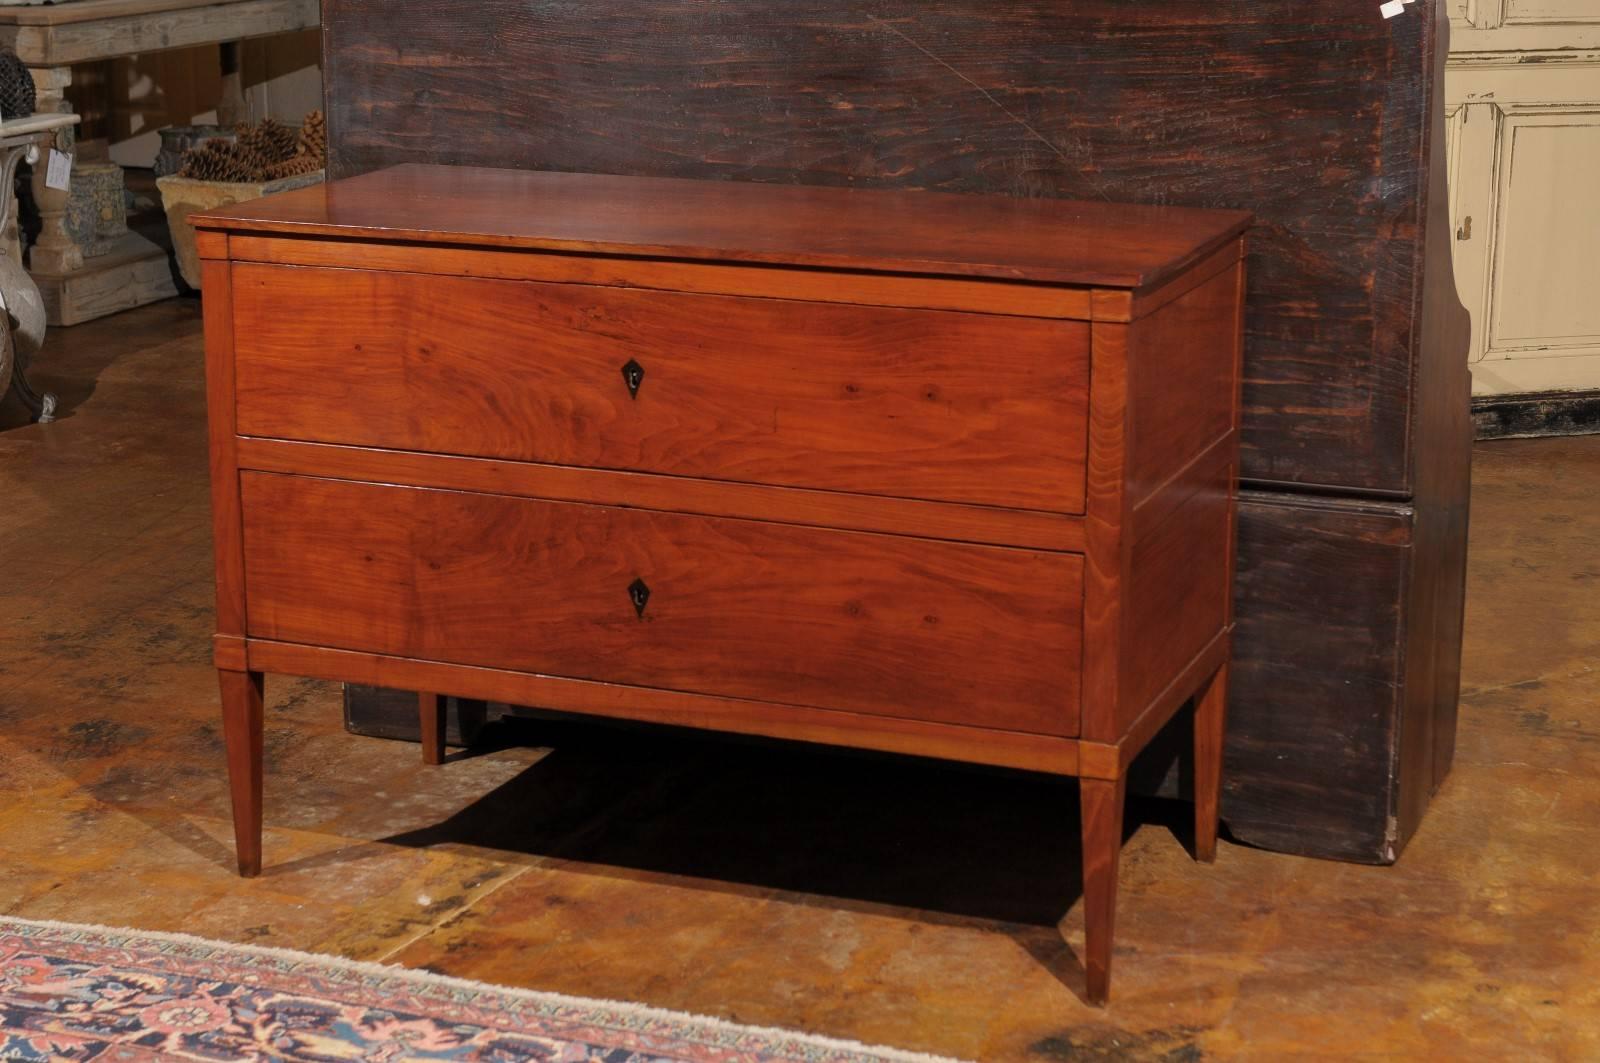 This Italian Neoclassical style fruitwood commode from the late 19th century features a rectangular single plank top over two dovetailed drawers with kite shaped ebonized wood inlaid escutcheons. The sides are divided into two paneled sections. The